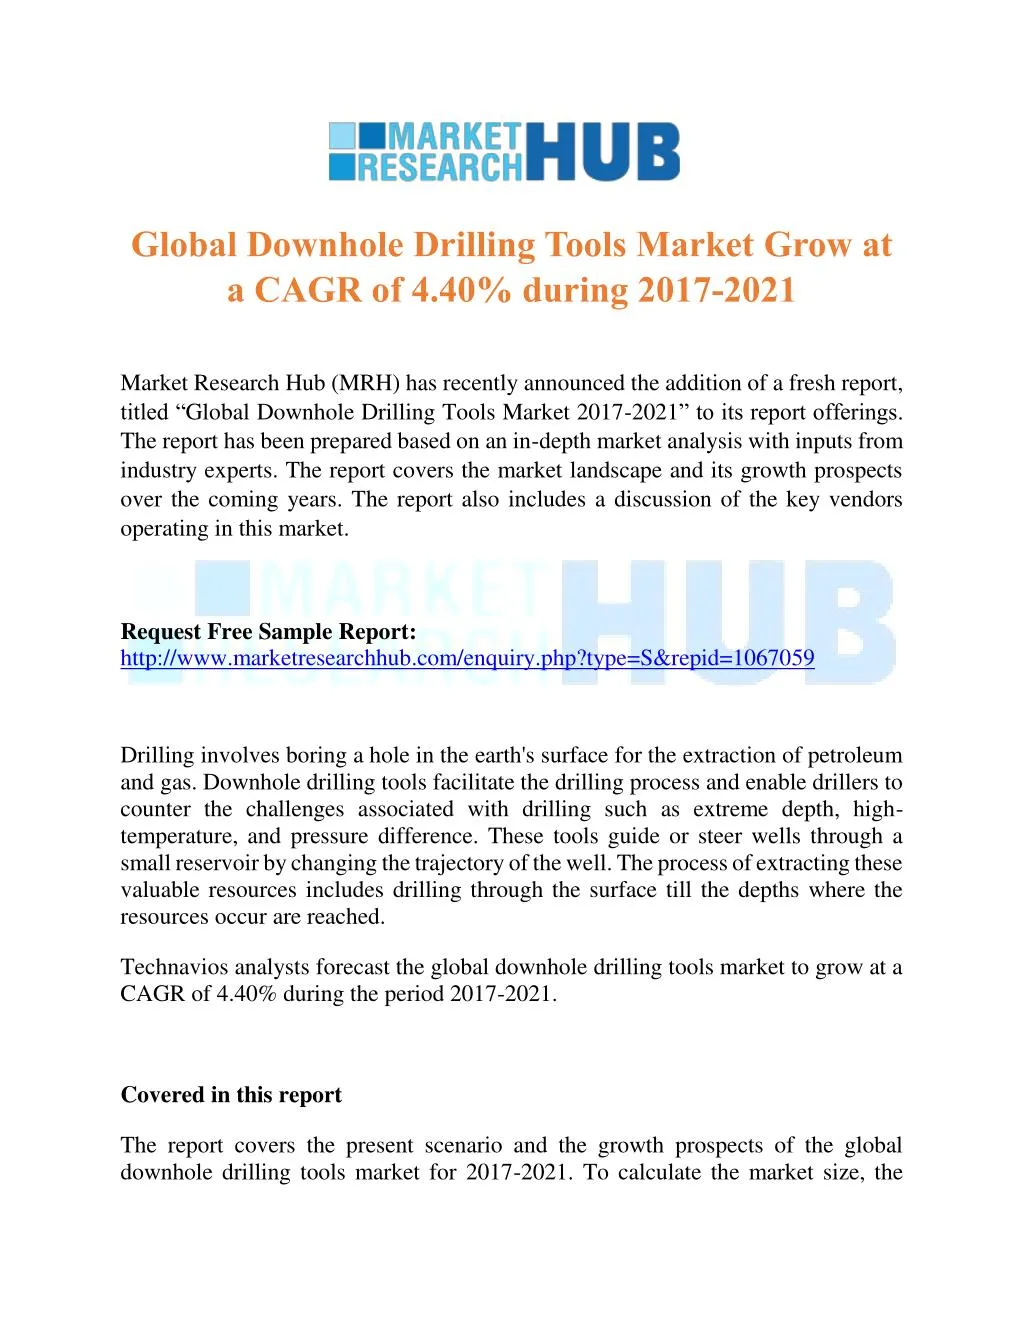 global downhole drilling tools market grow